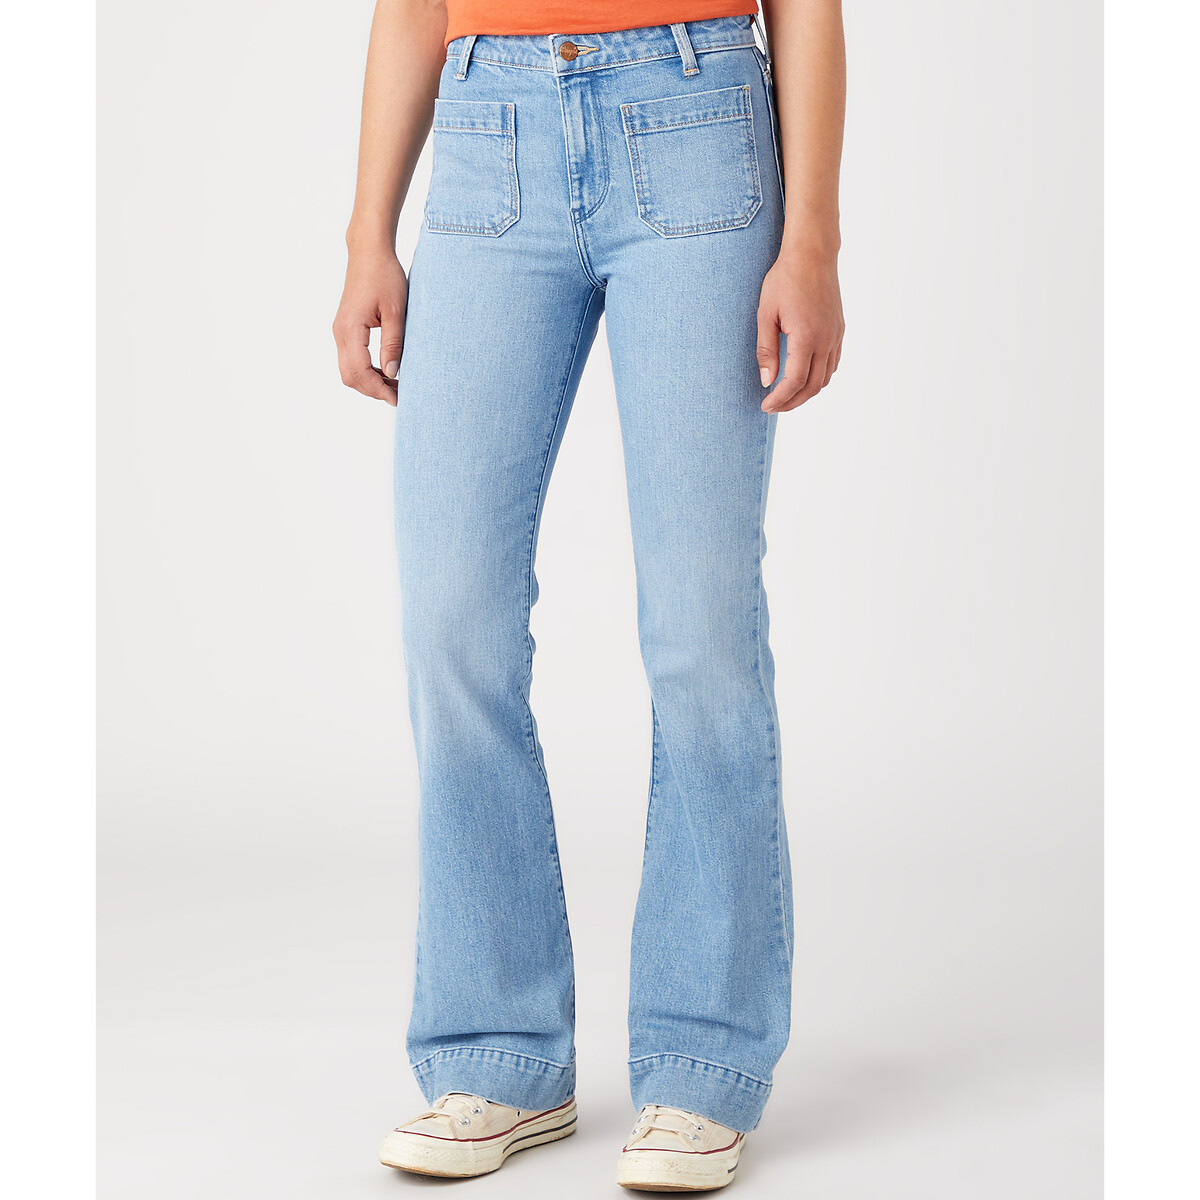 Wrangler Flare jeans, standaard taille